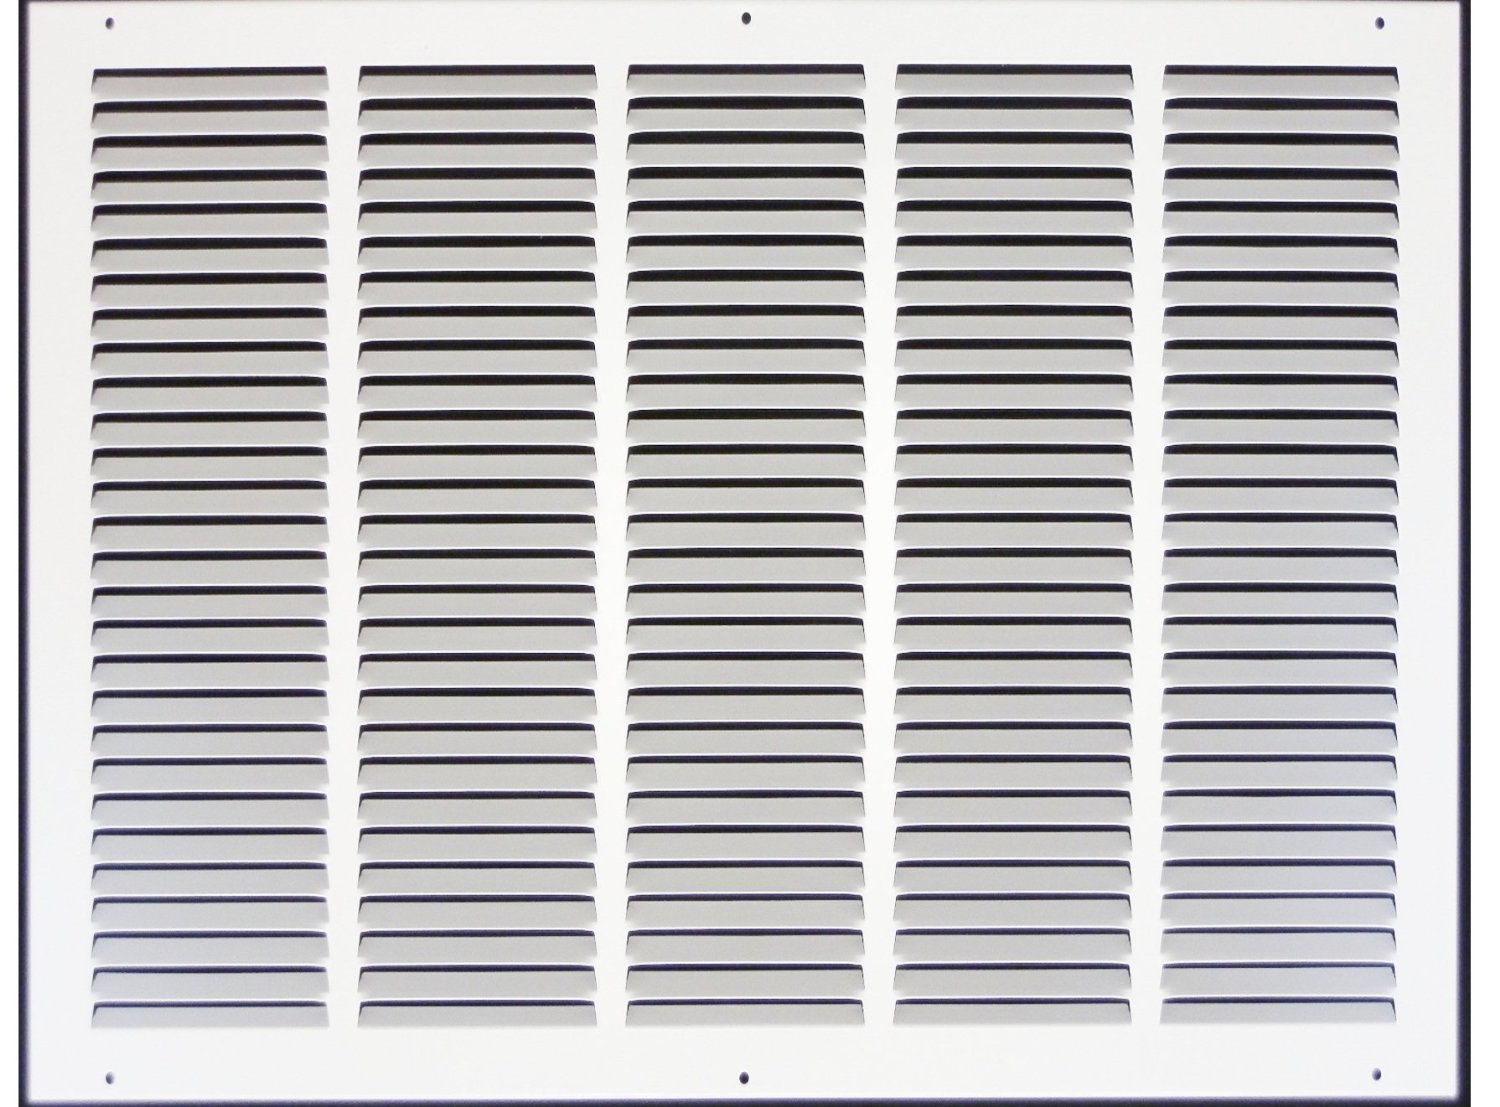 25" X 25" Air Vent Return Grilles - Sidewall and Ceiling - Steel